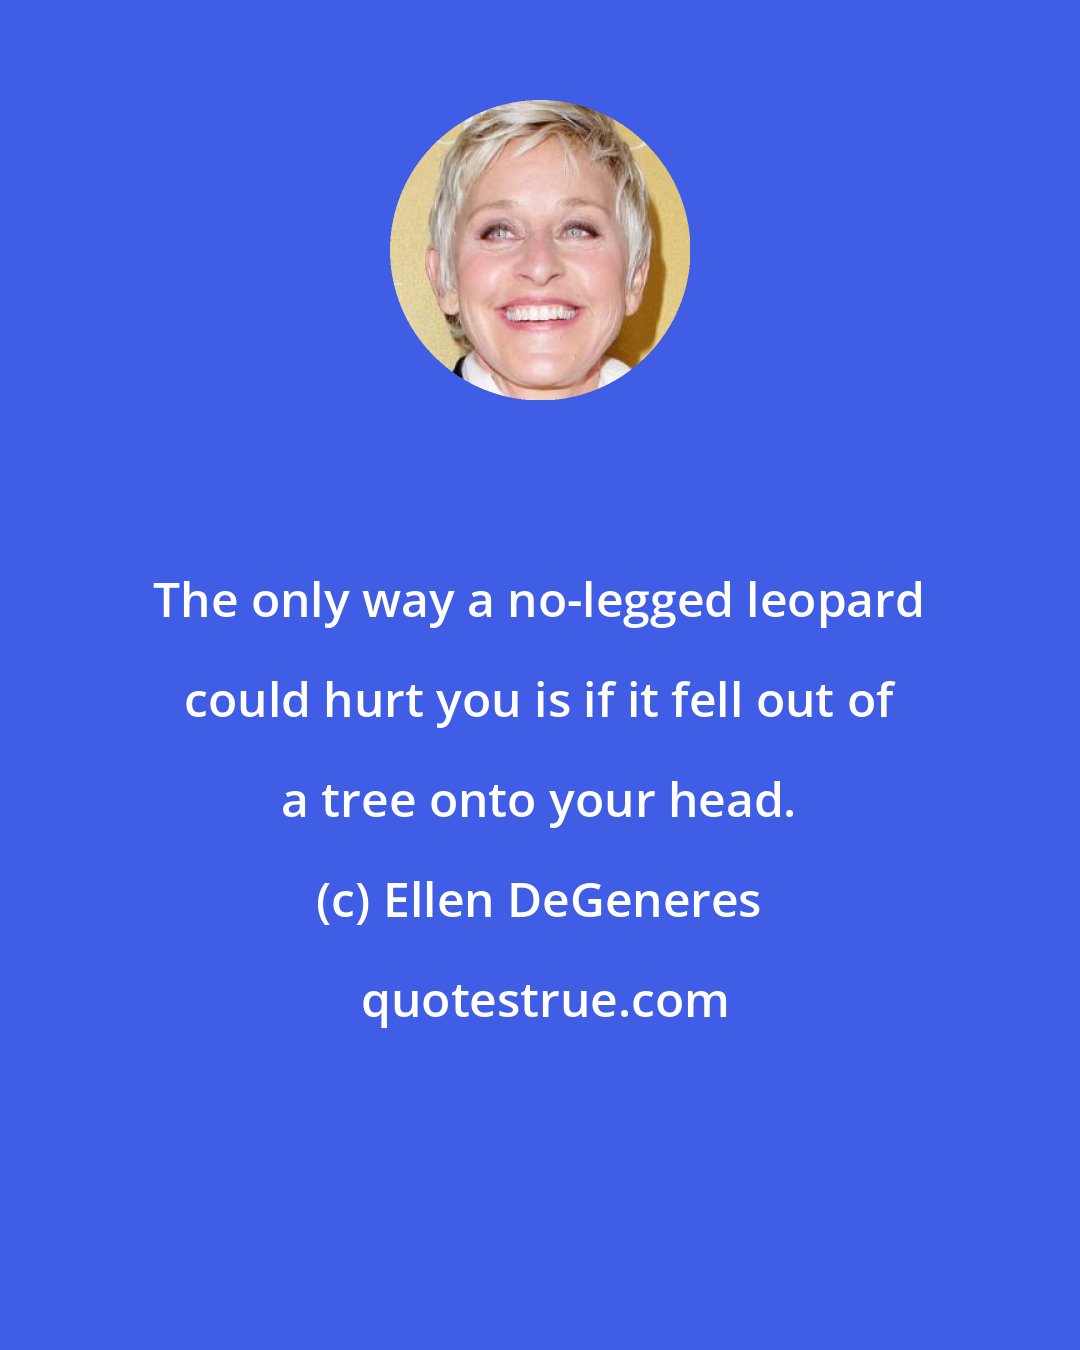 Ellen DeGeneres: The only way a no-legged leopard could hurt you is if it fell out of a tree onto your head.